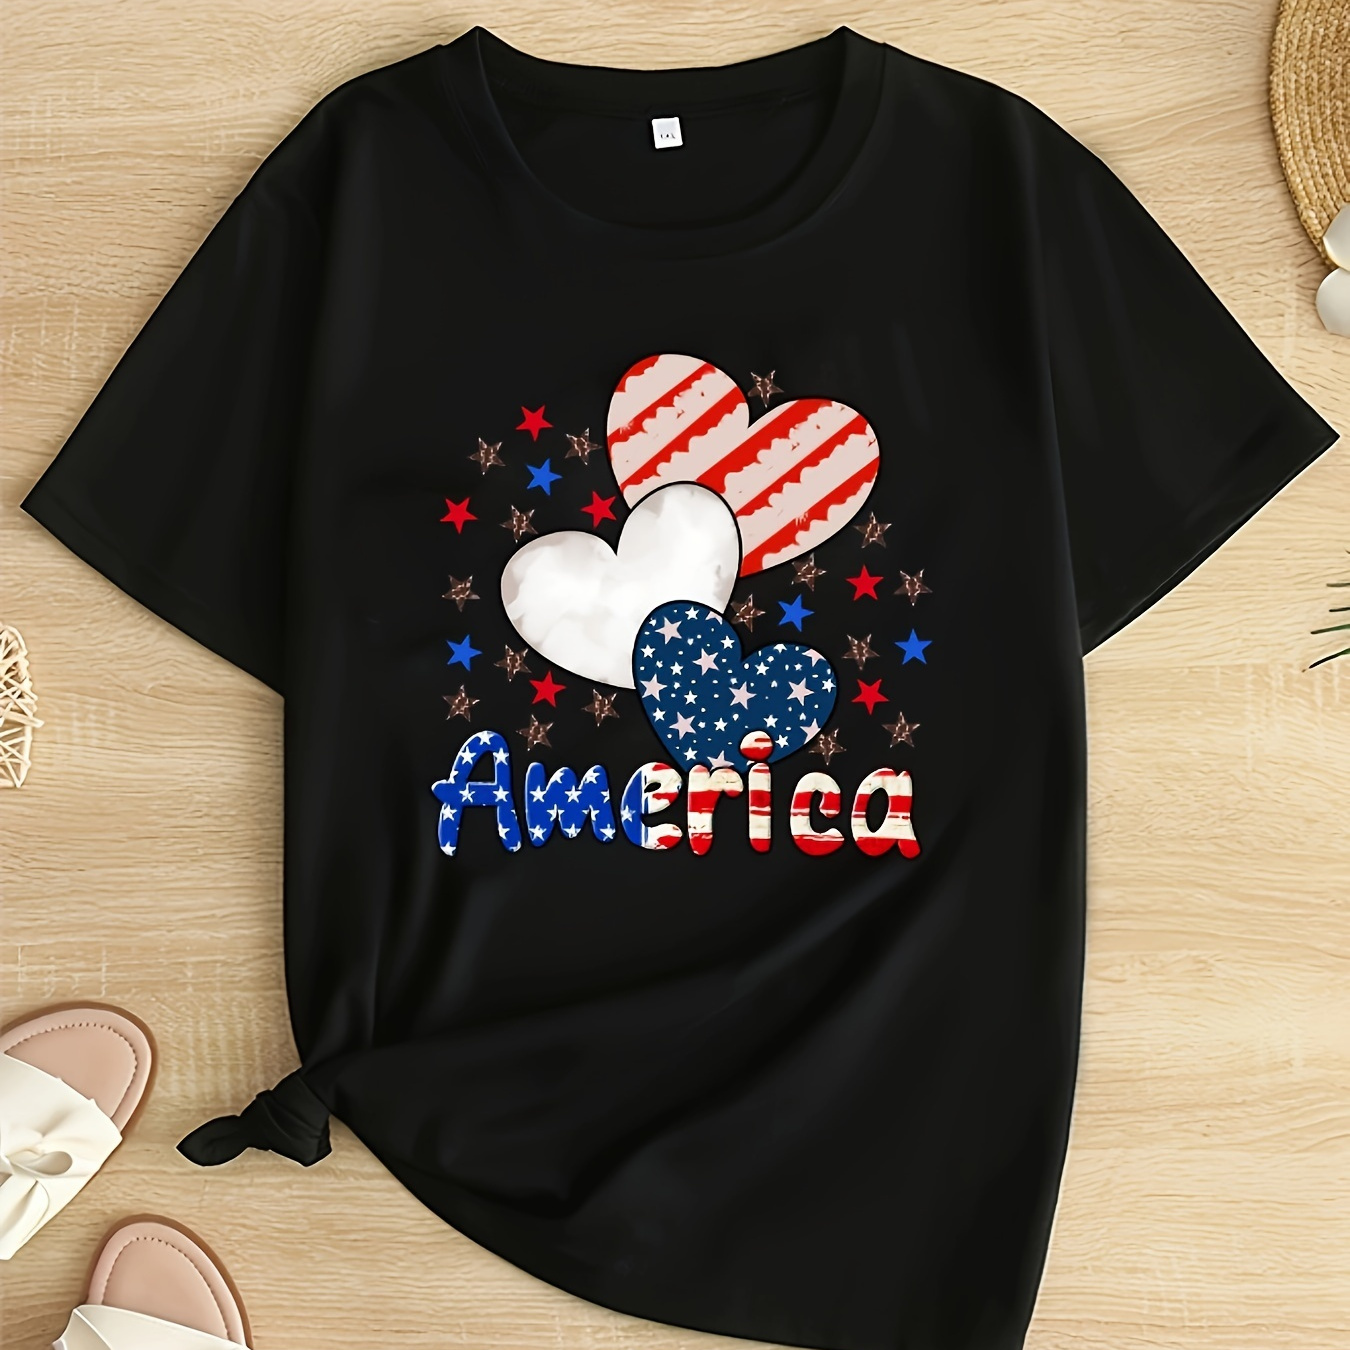 

Plus Size Flag Heart & Letter Print T-shirt, Casual Short Sleeve Top For Spring & Summer, Women's Plus Size Clothing